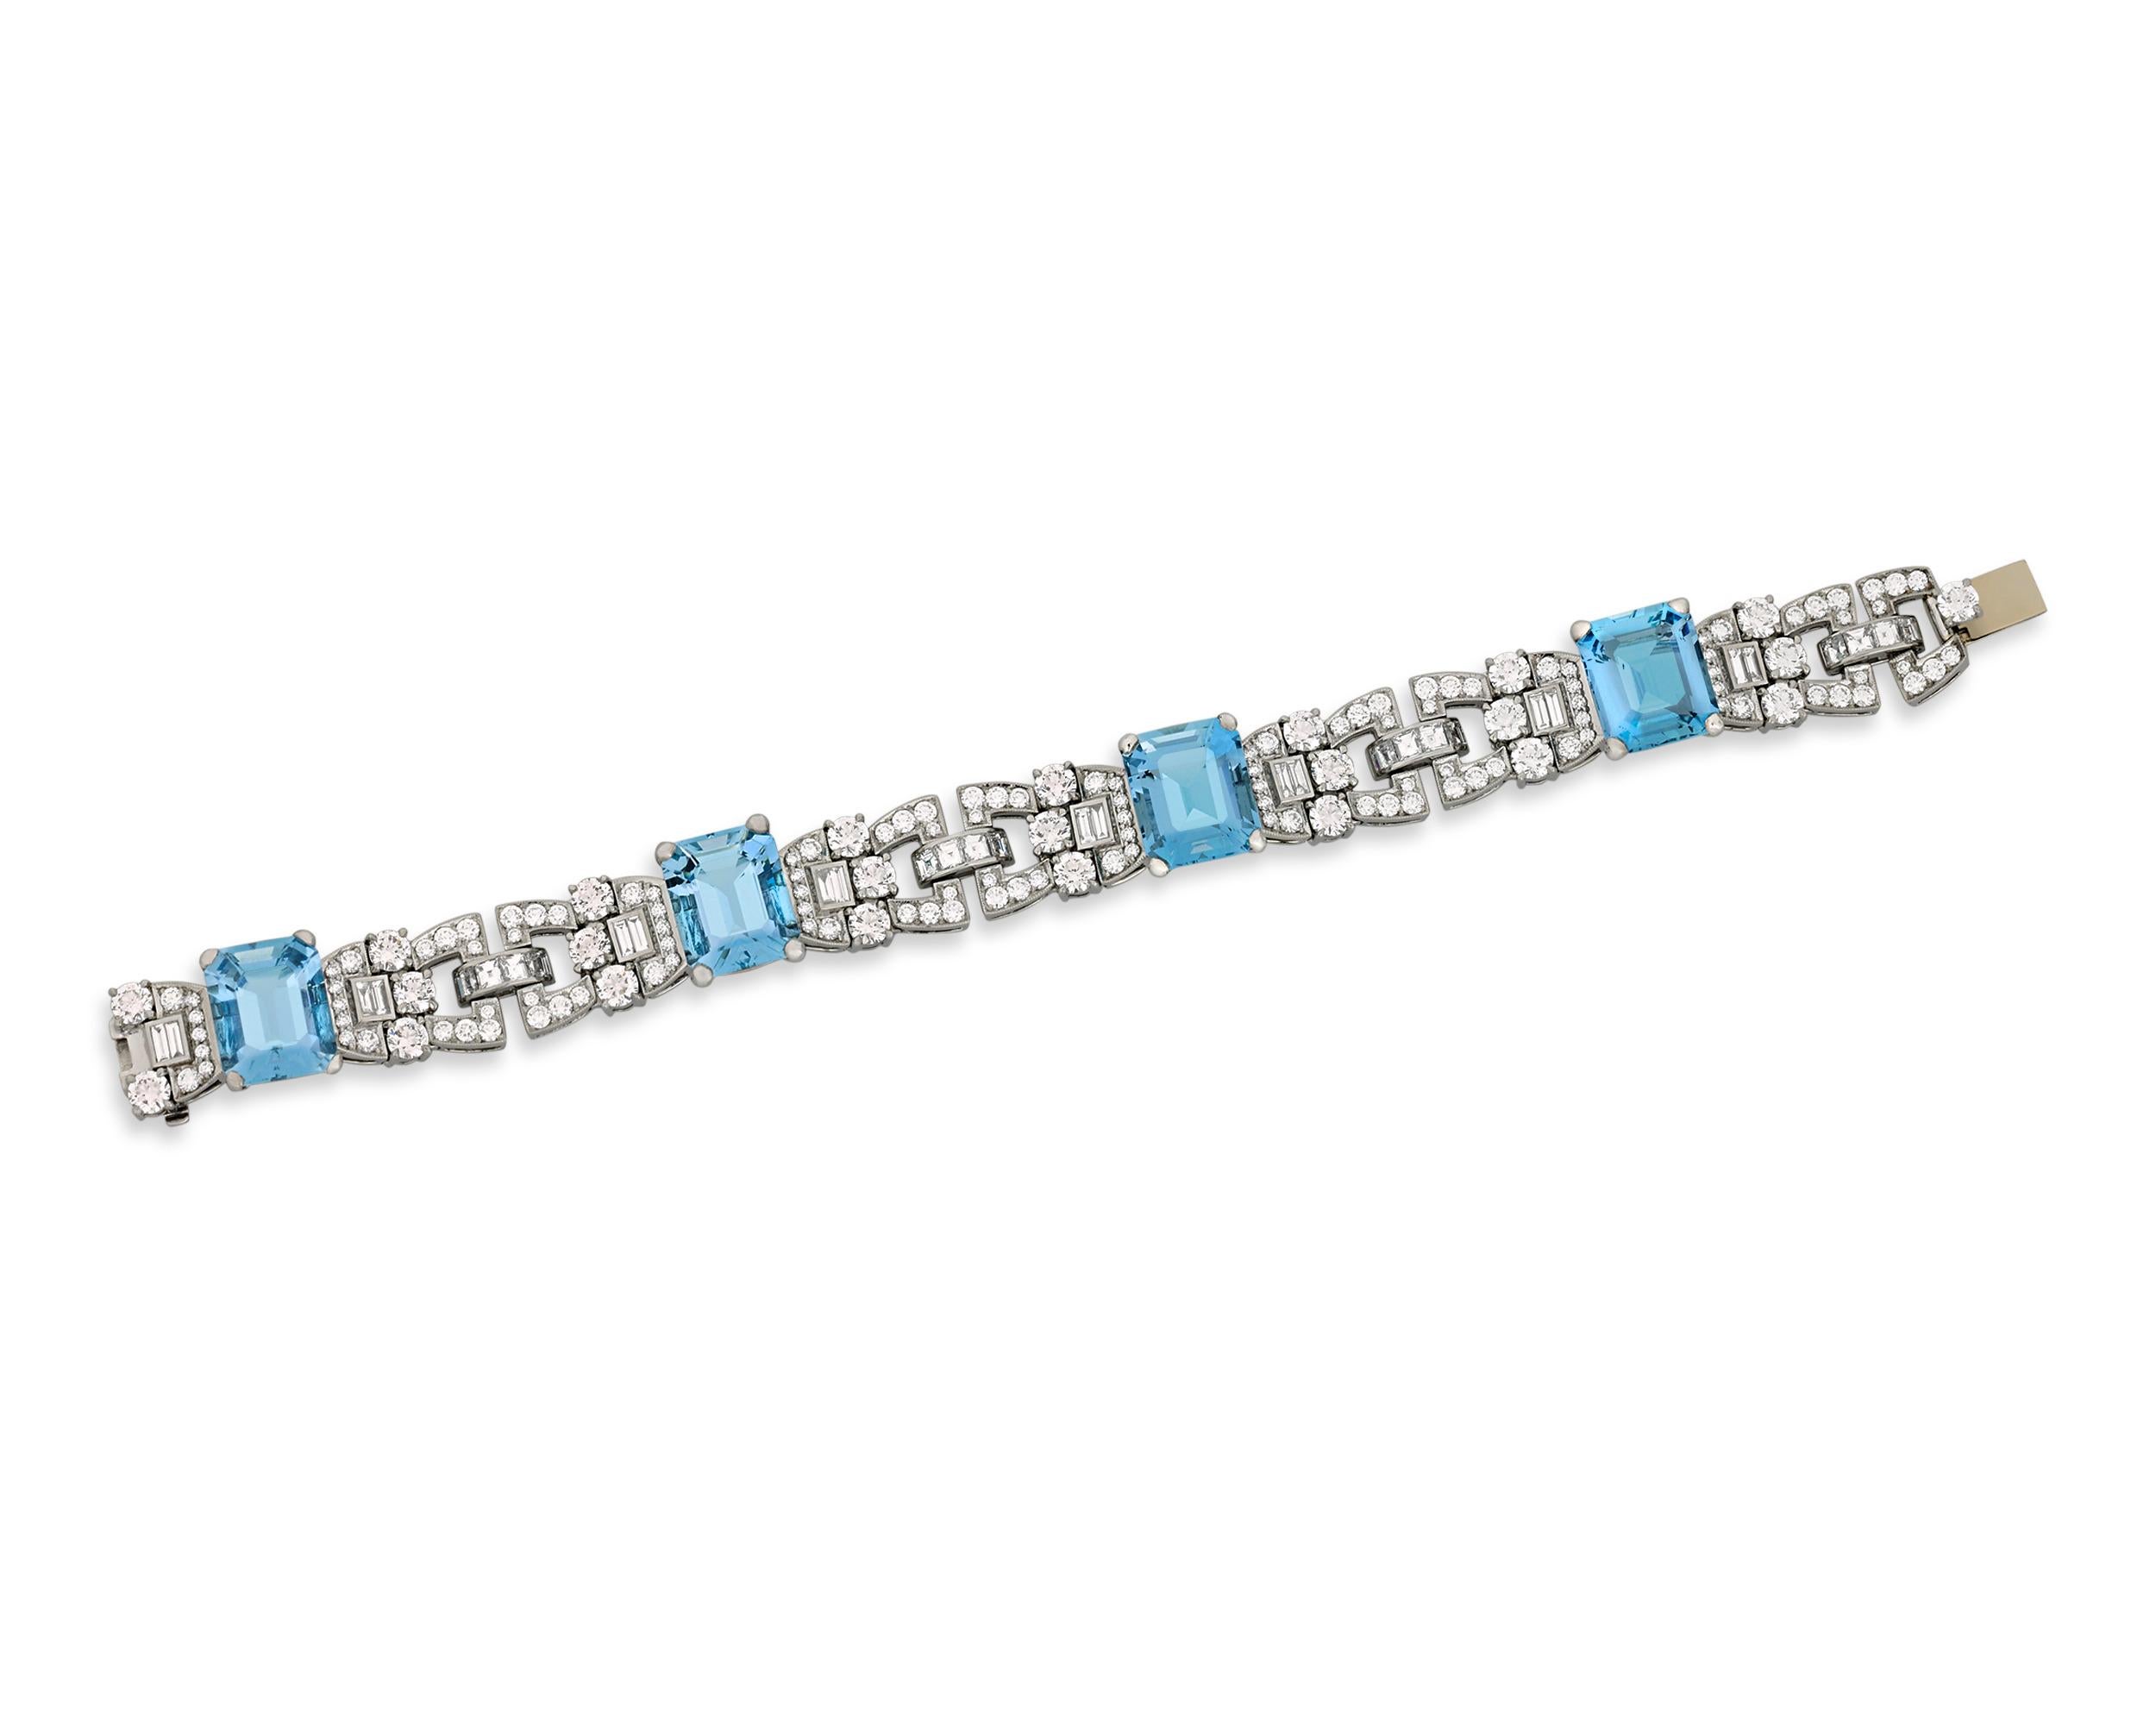 This remarkable bracelet by Raymond Yard showcases four stunning emerald-cut aquamarines totaling 25.76 carats. Displaying a stunning ocean-blue color and exceptional clarity, the elegant jewels are accentuated by a host of dazzling baguette, square